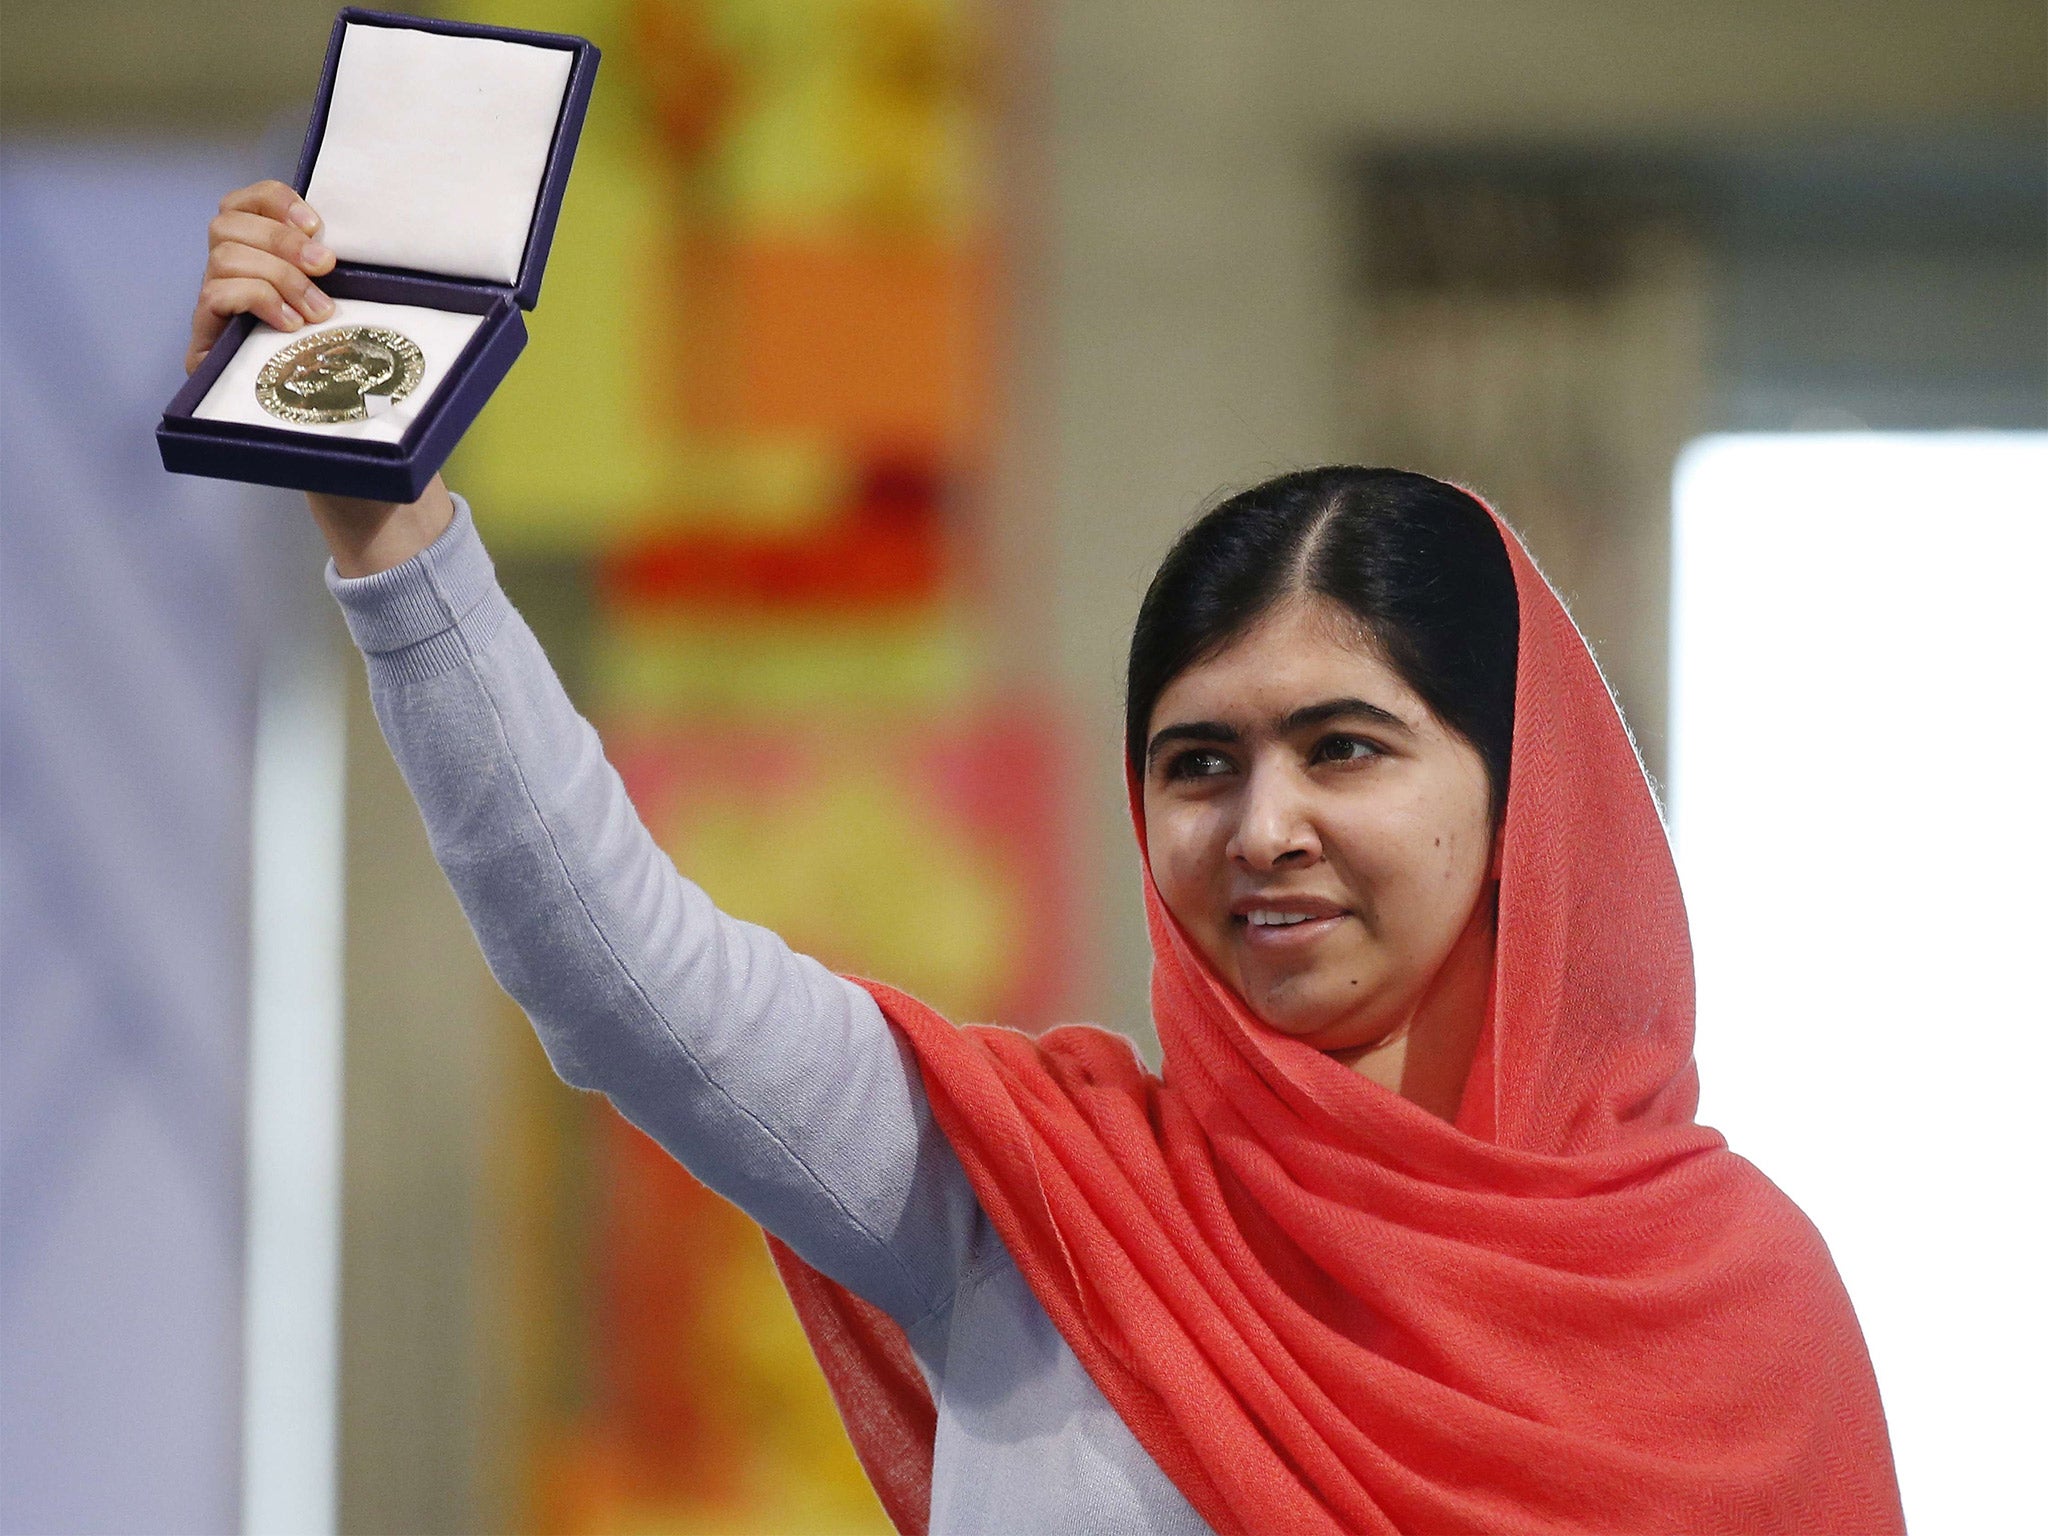 Shot by the Taliban in 2012 for blogging about life under their rule, Yousafzai has become an inspirational campaigner for education for women and girls. She is the youngest person to receive the Nobel Prize, giving her access to political leaders worldwi